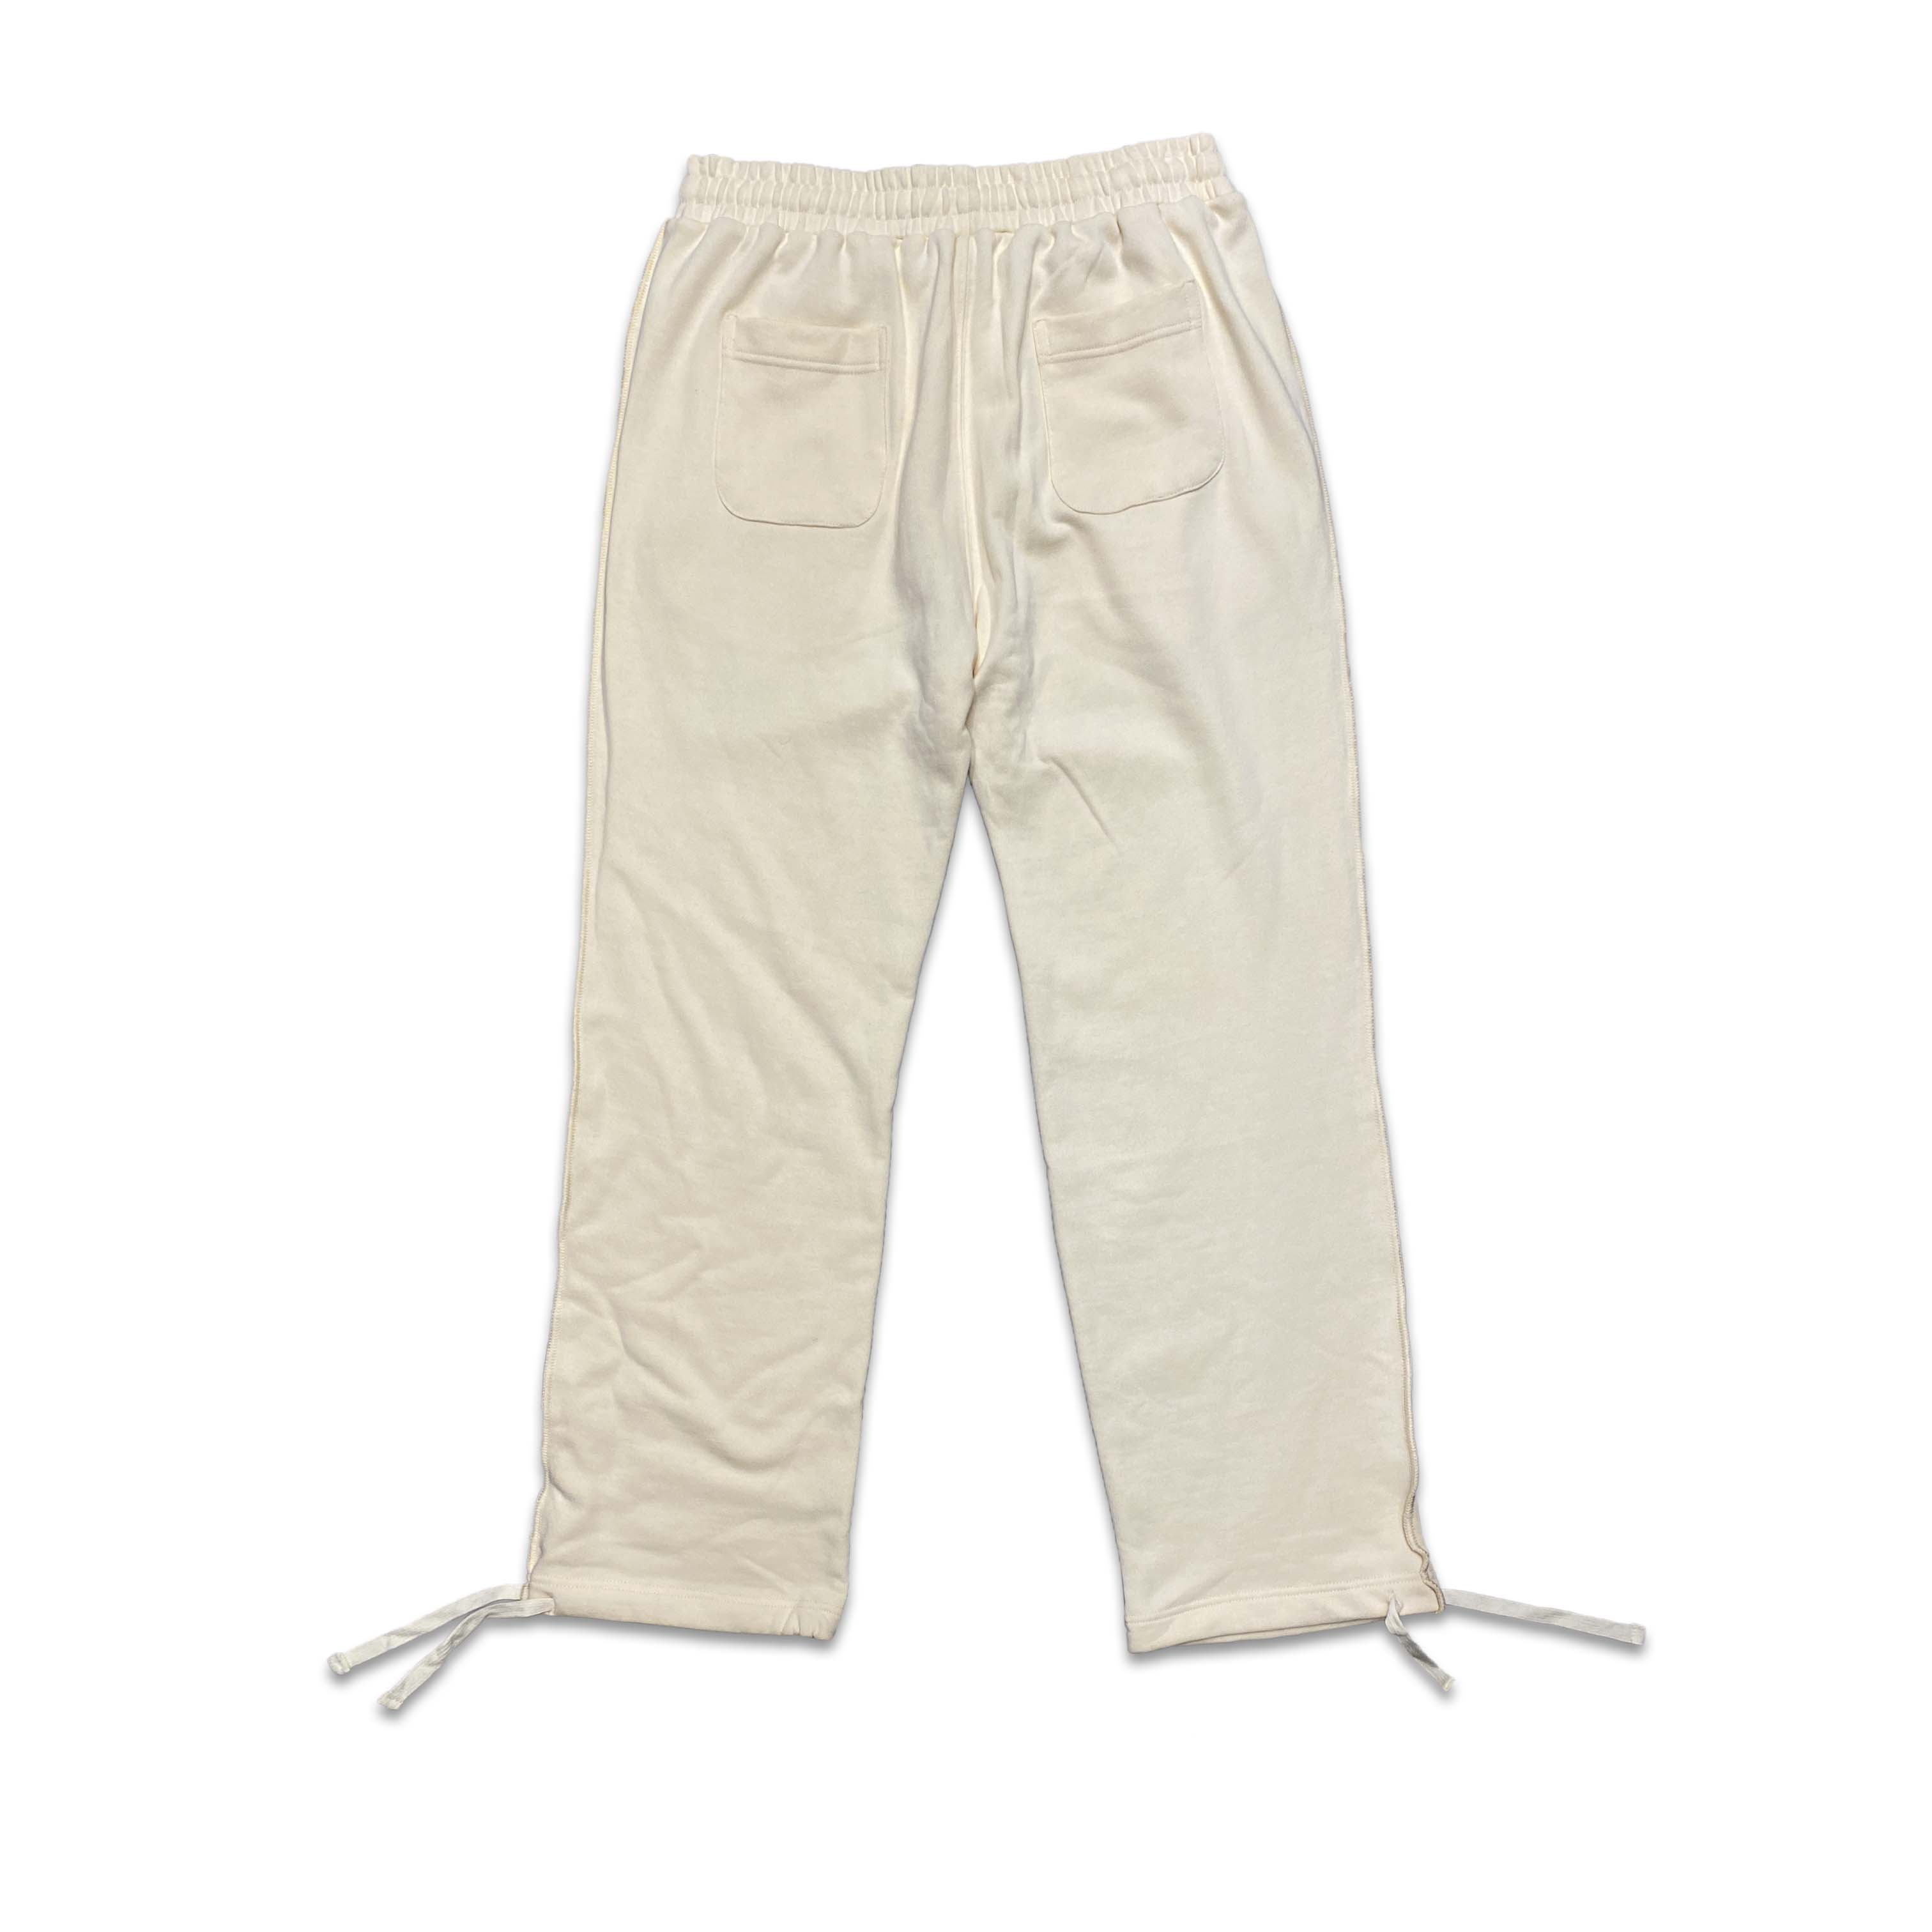 Soled Out Sweatpants Cream New Size L